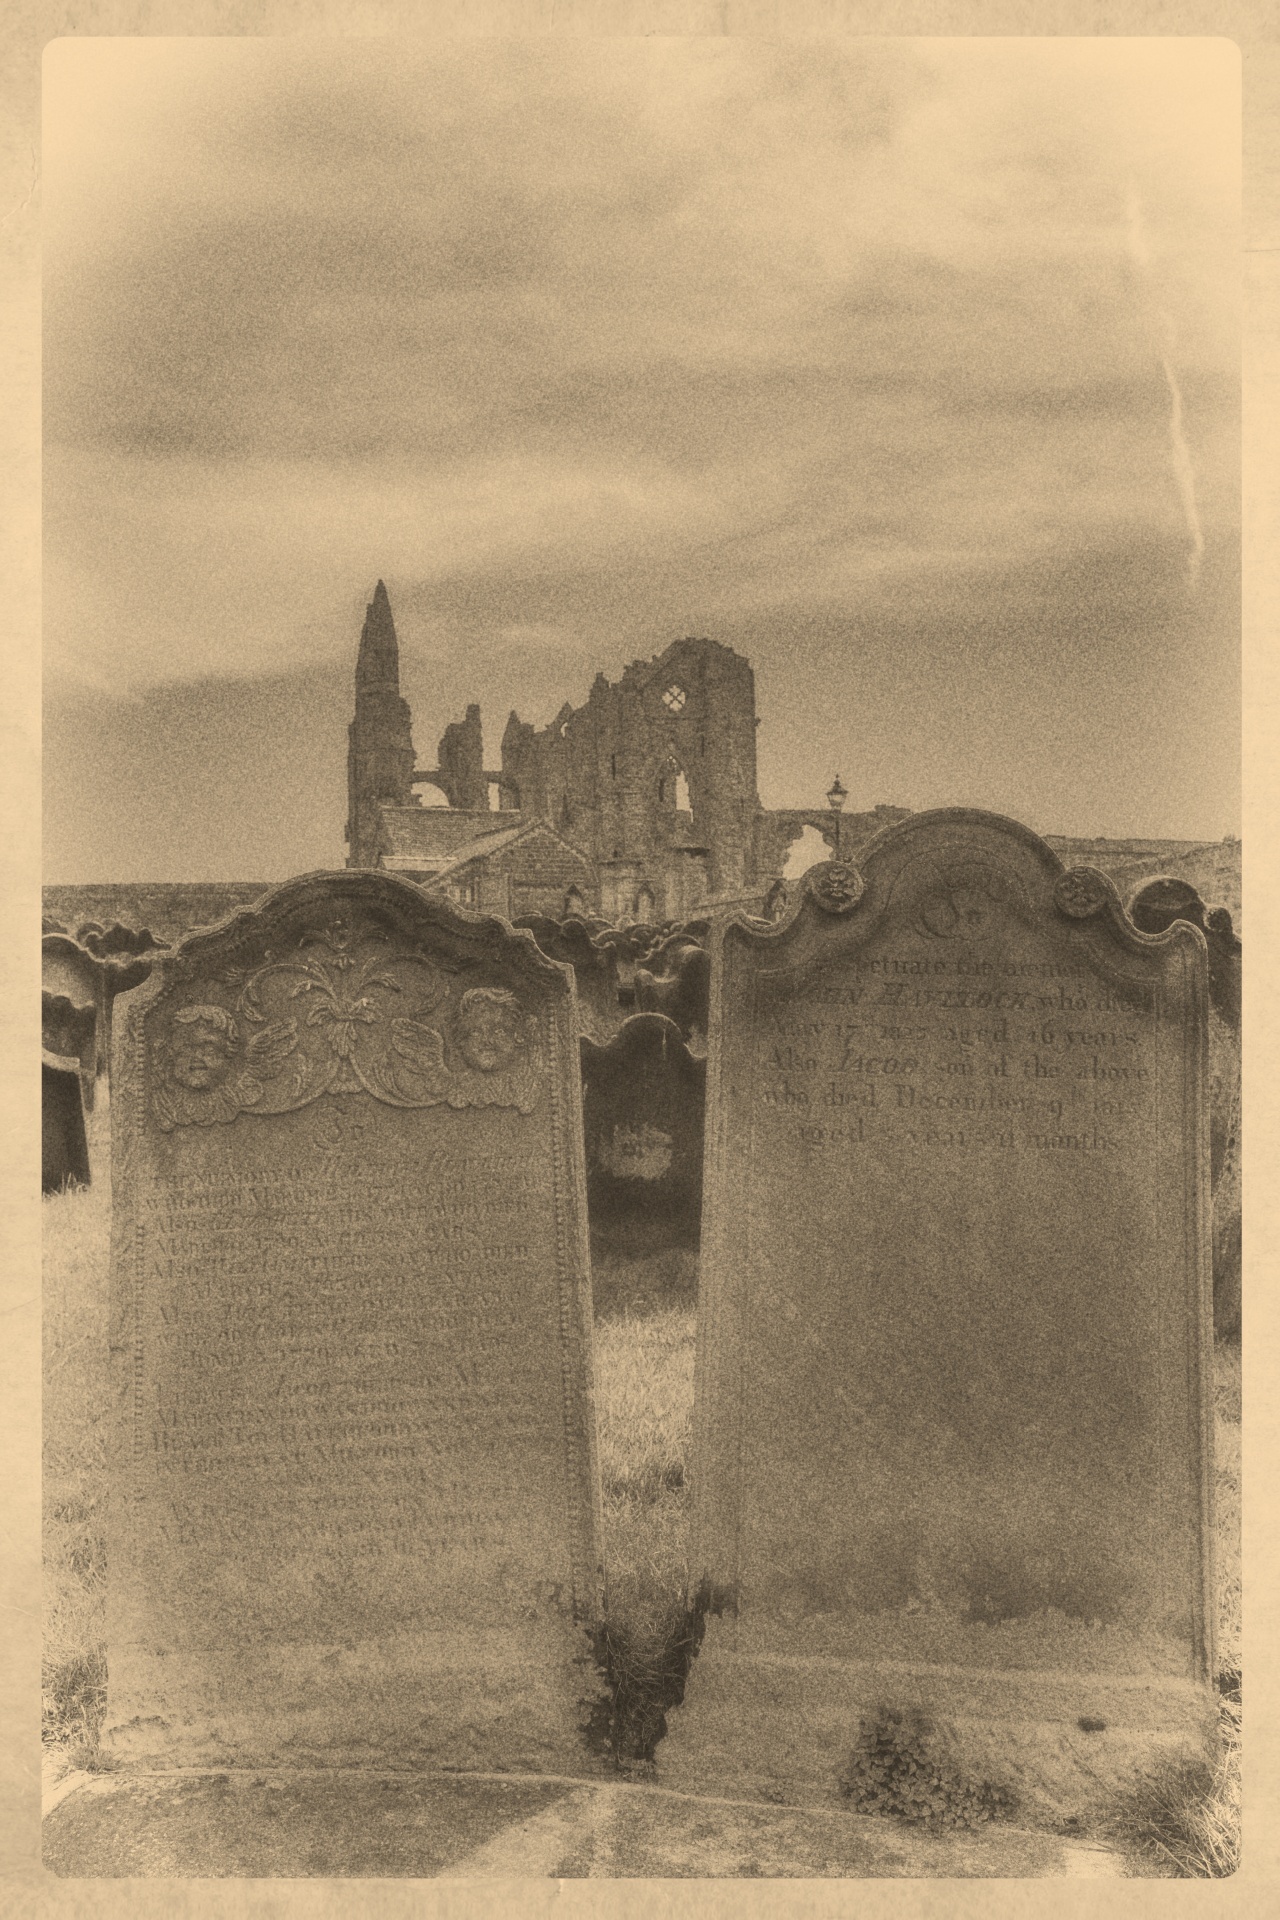 Cemetery In Whitby